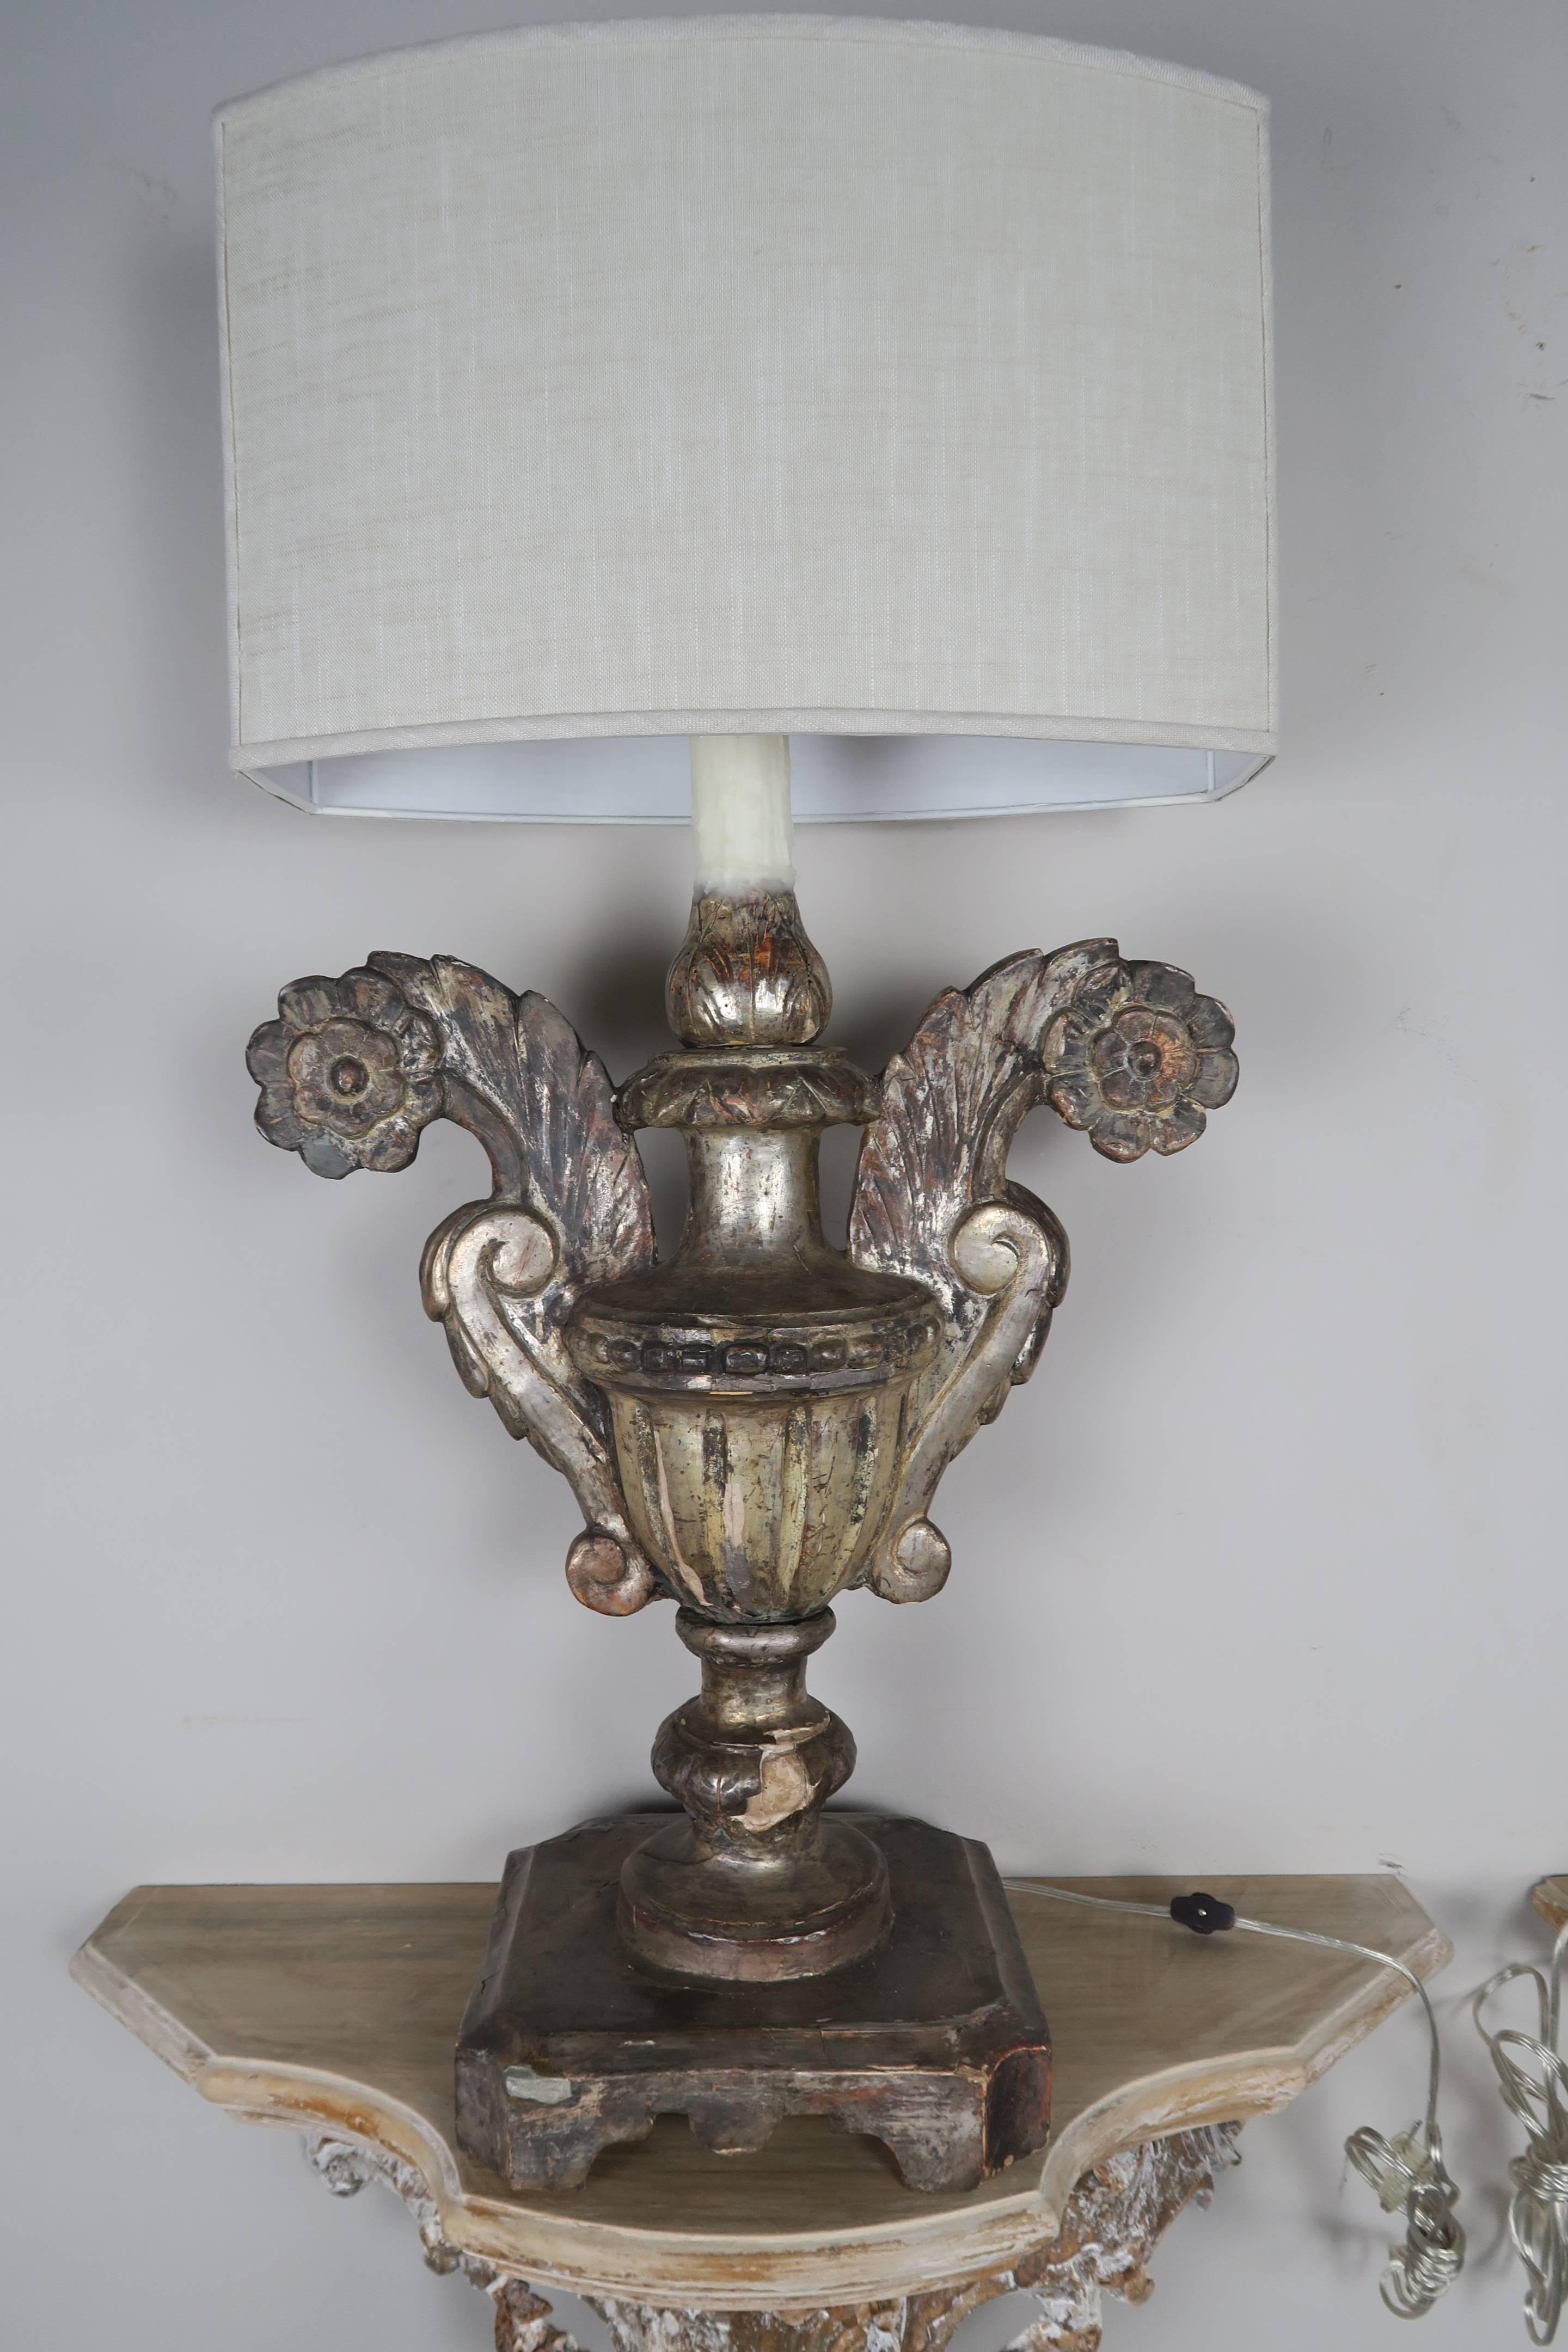 Pair of 19th century Italian carved wood silvered large scale urns wired into lamps with white linen shades.